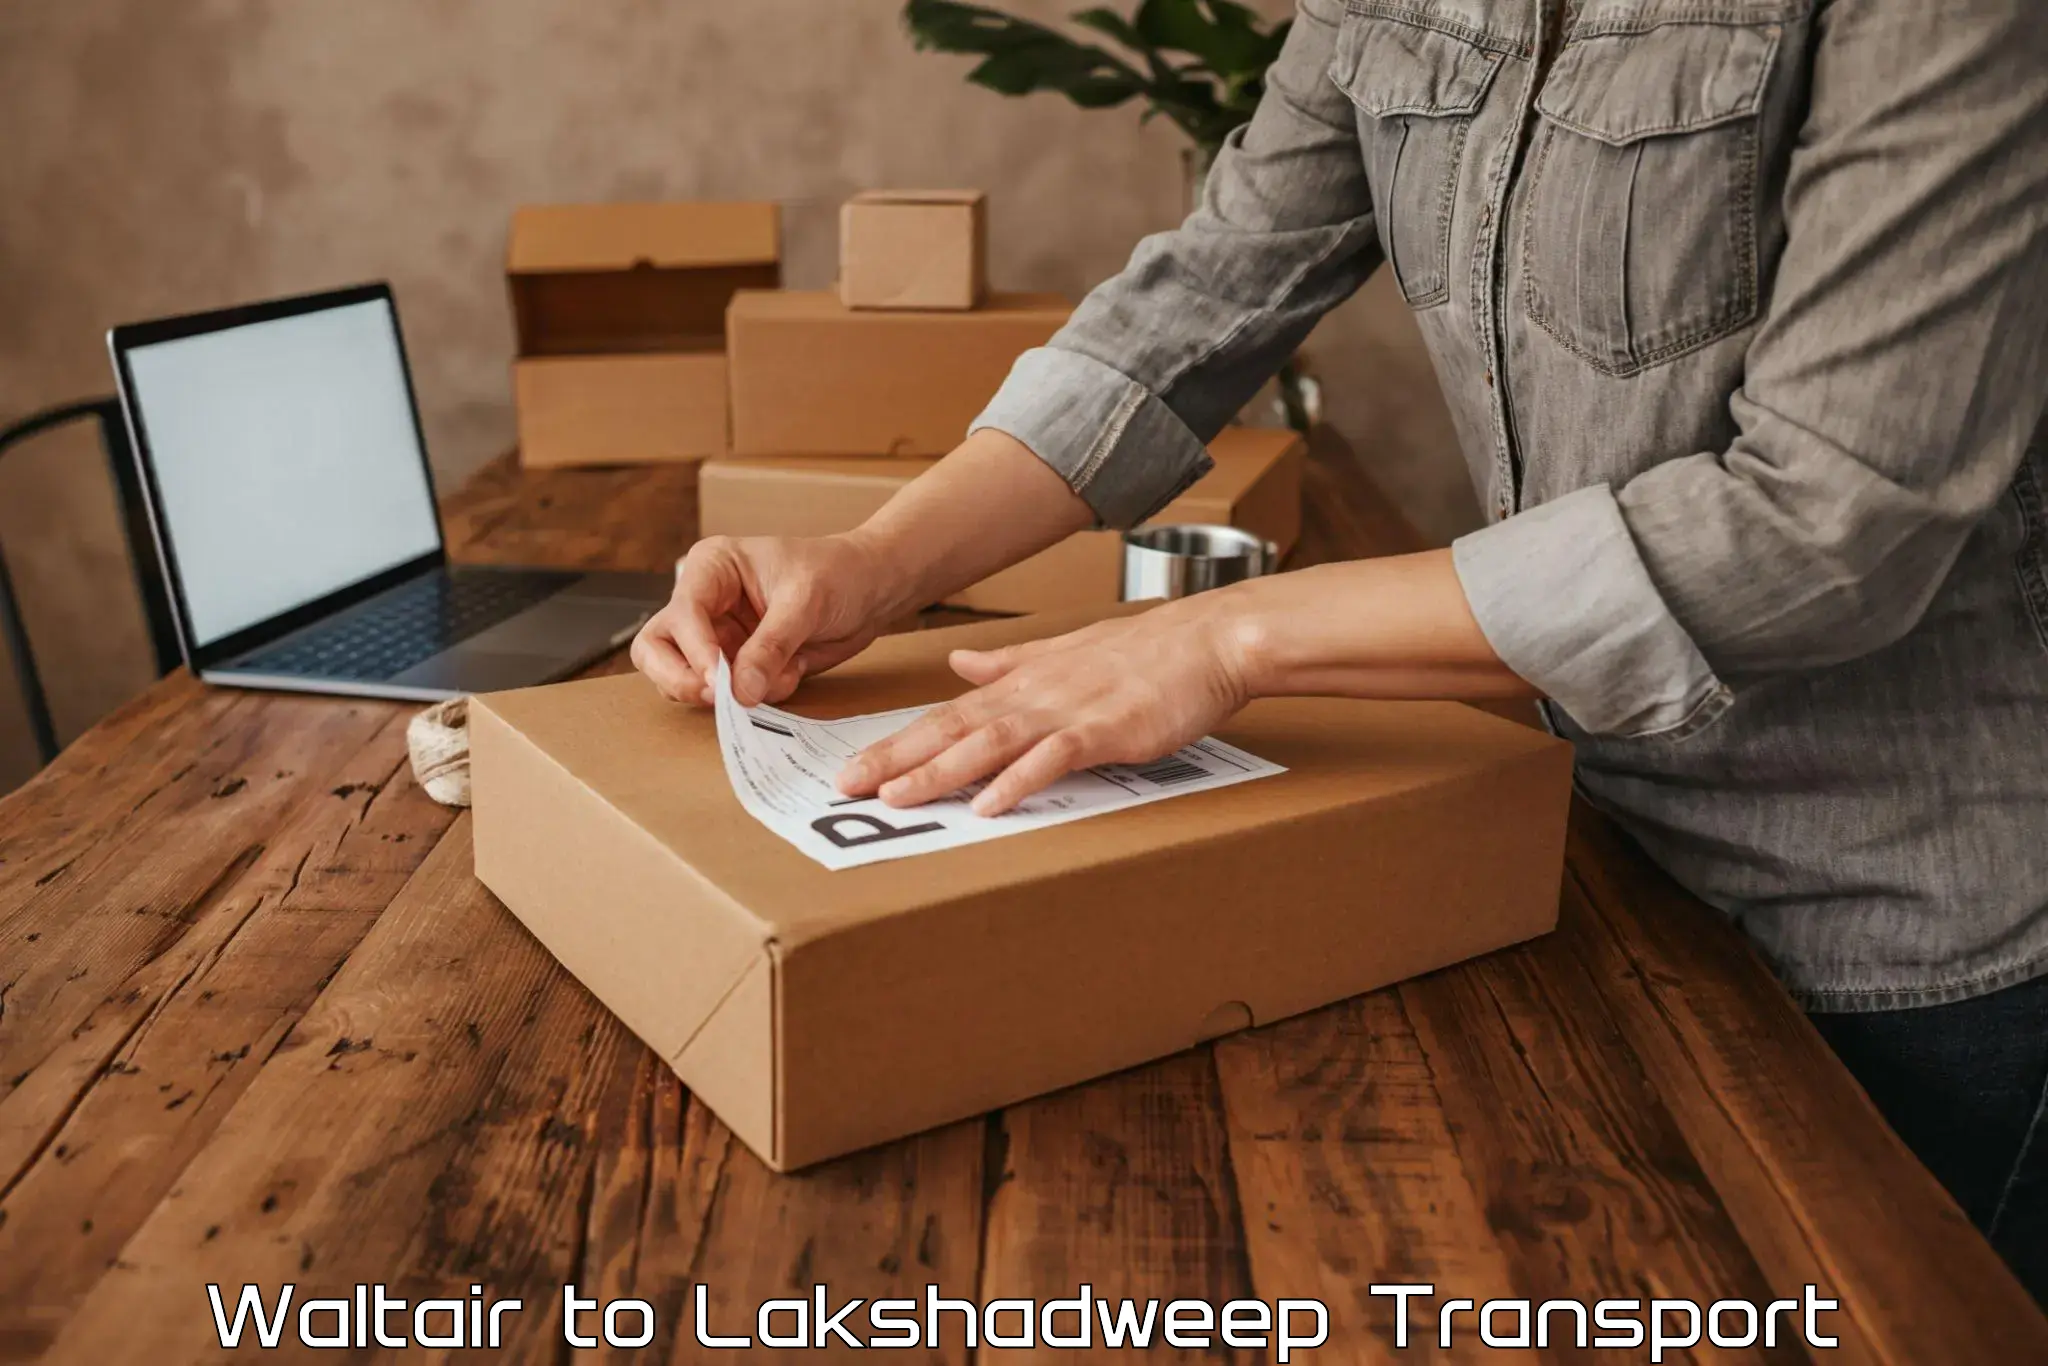 Transport bike from one state to another Waltair to Lakshadweep